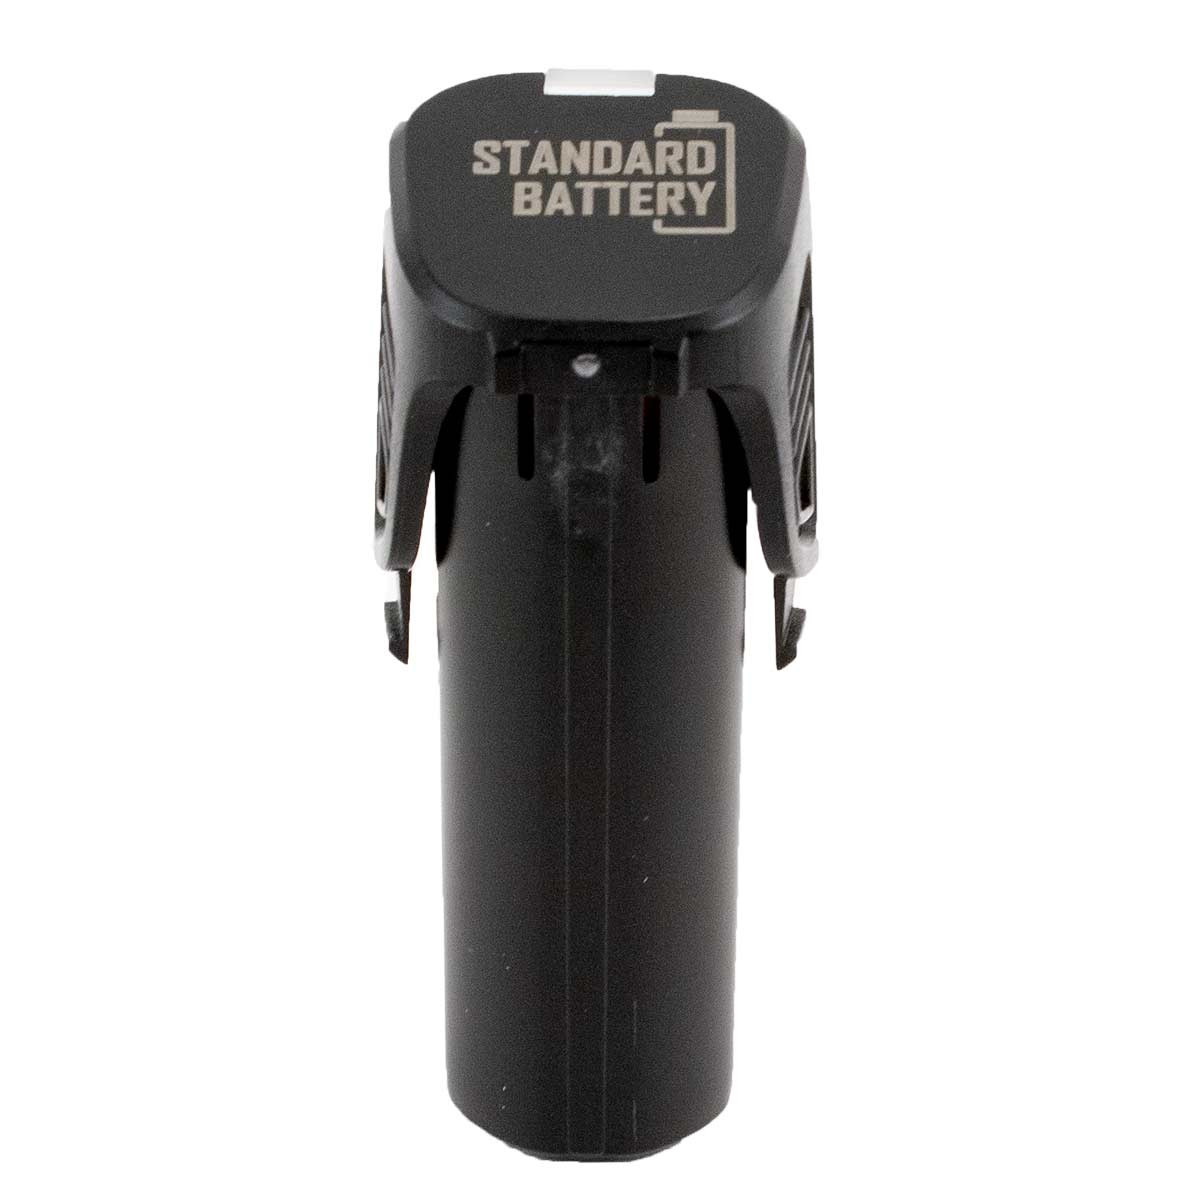 WAHL CREATIVA CLIPPER STANDARD REPLACEMENT BATTERY 8314